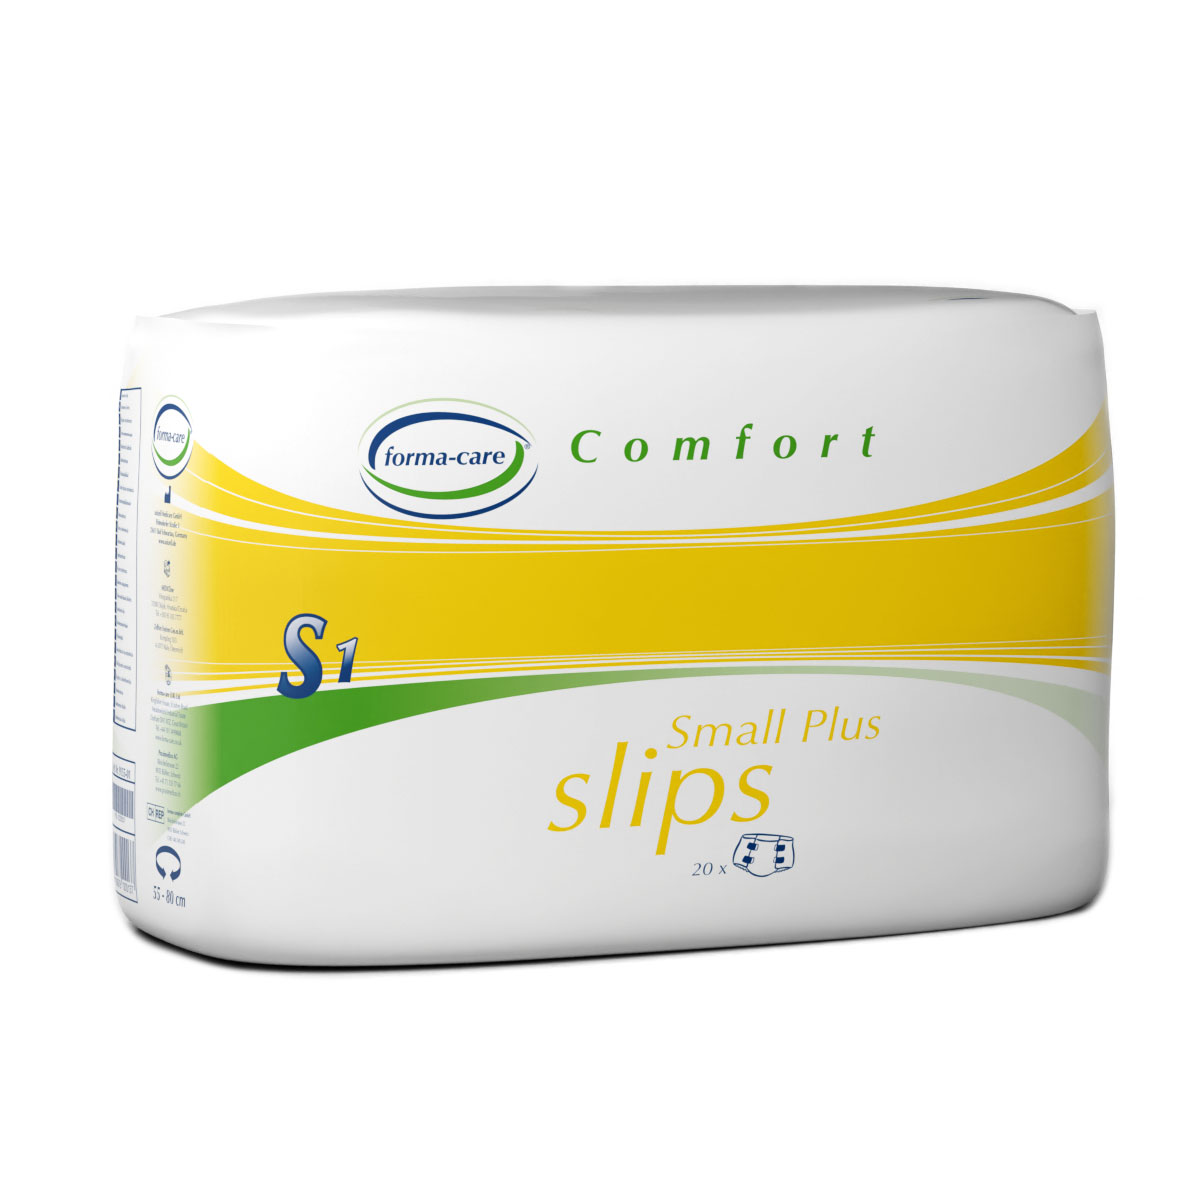 Forma-Care Slip comfort PLUS - Small (S1) - 20 St. Einzelpackung